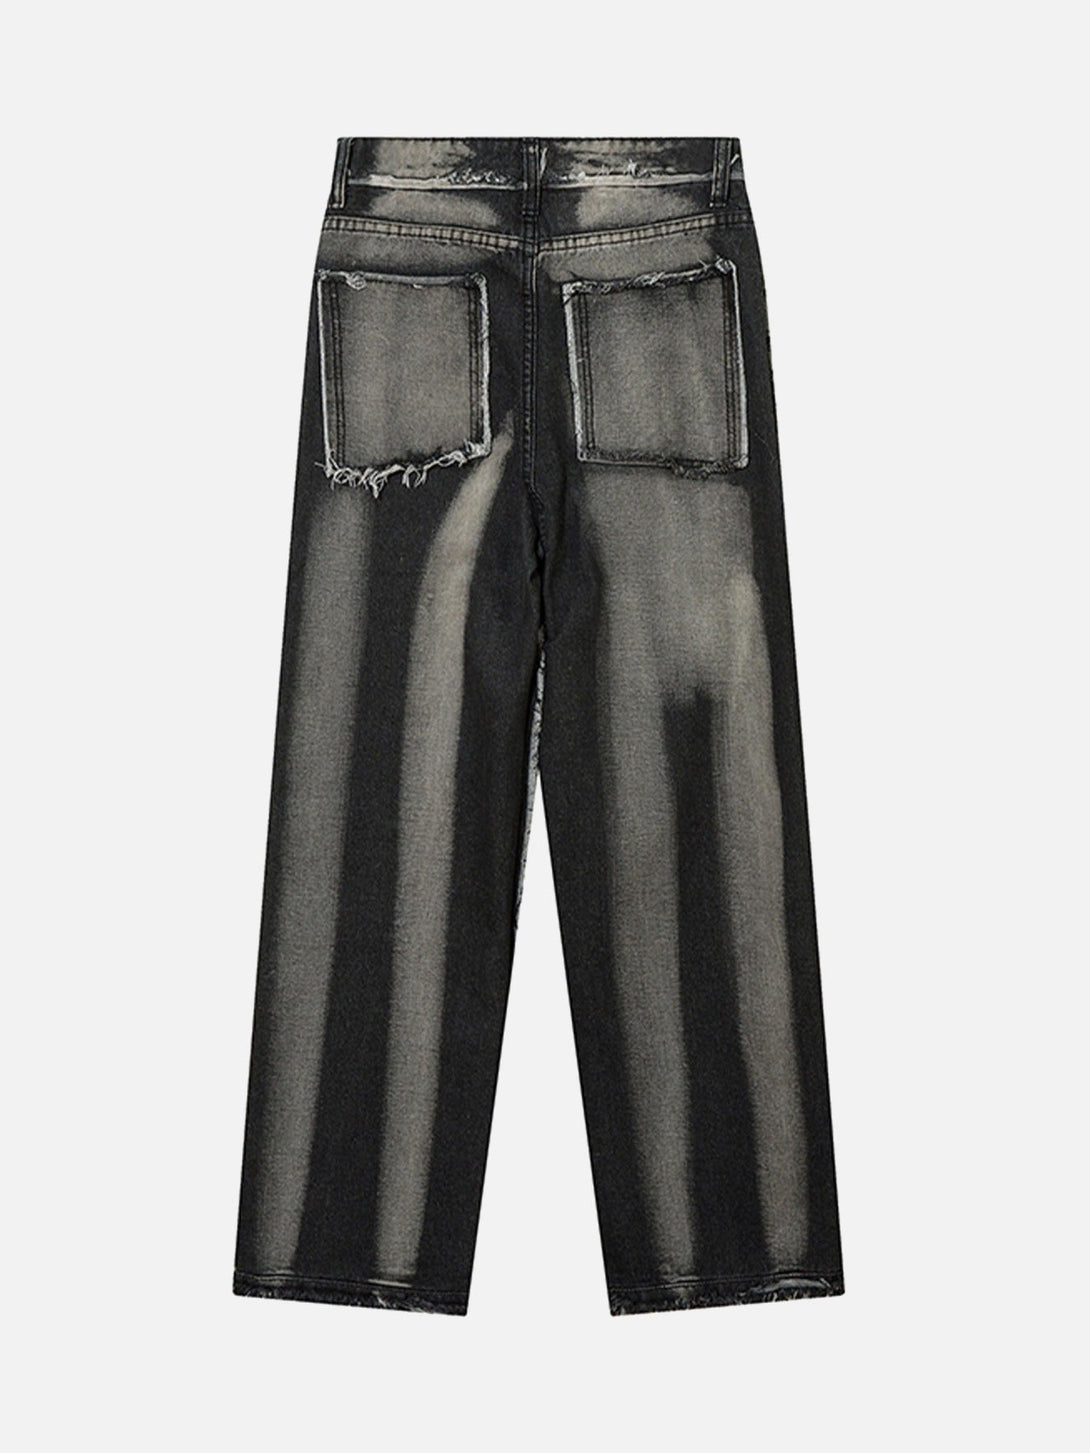 Majesda® - Cat Whiskers Raw Edge Patchwork Jeans - 1784- Outfit Ideas - Streetwear Fashion - majesda.com